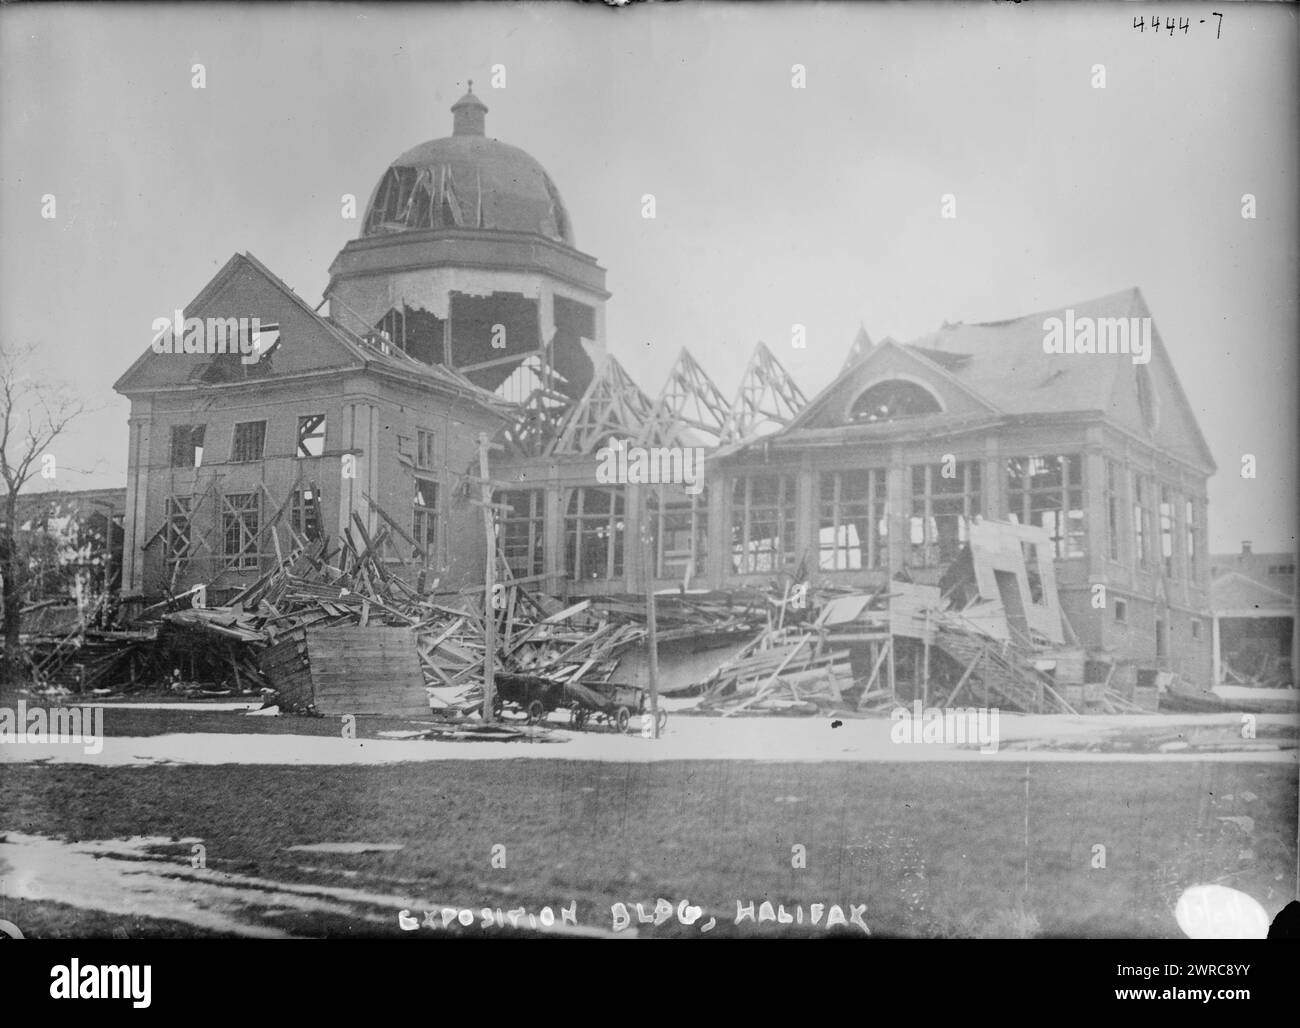 Exposition bldg., Halifax wreckage, Photo shows main building of the Nova Scotia Provincial Exhibition, Halifax, Canada, damaged in the December 6, 1917 explosion., 1917 or 1918, Glass negatives, 1 negative: glass Stock Photo